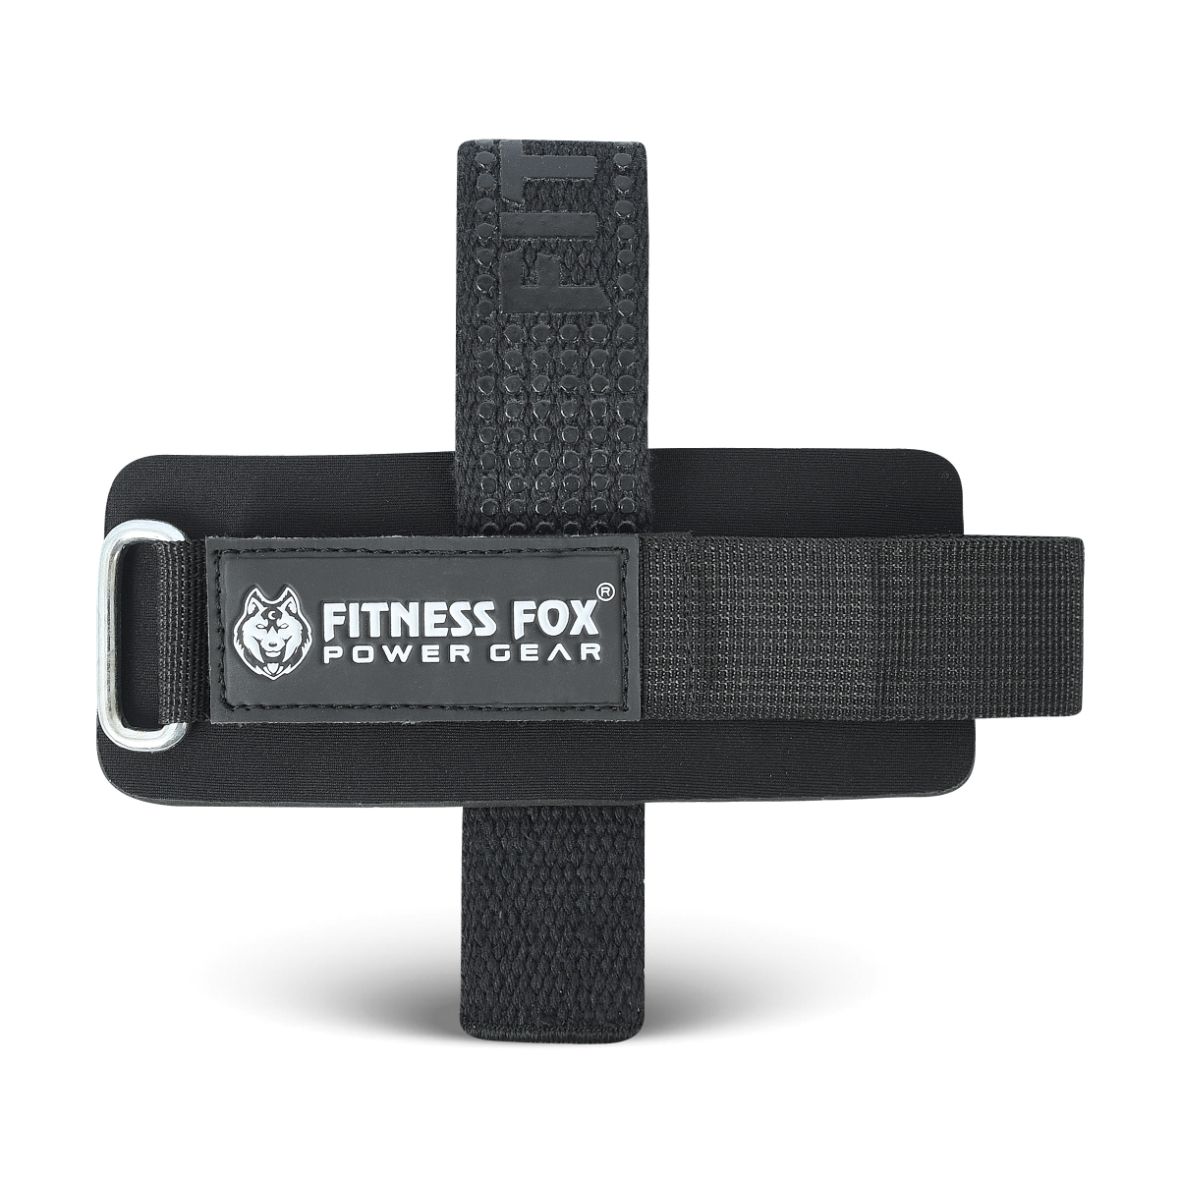 FITNESS FOX Heavy lifting straps for Deadlift, Powerlifting & Weightlifting